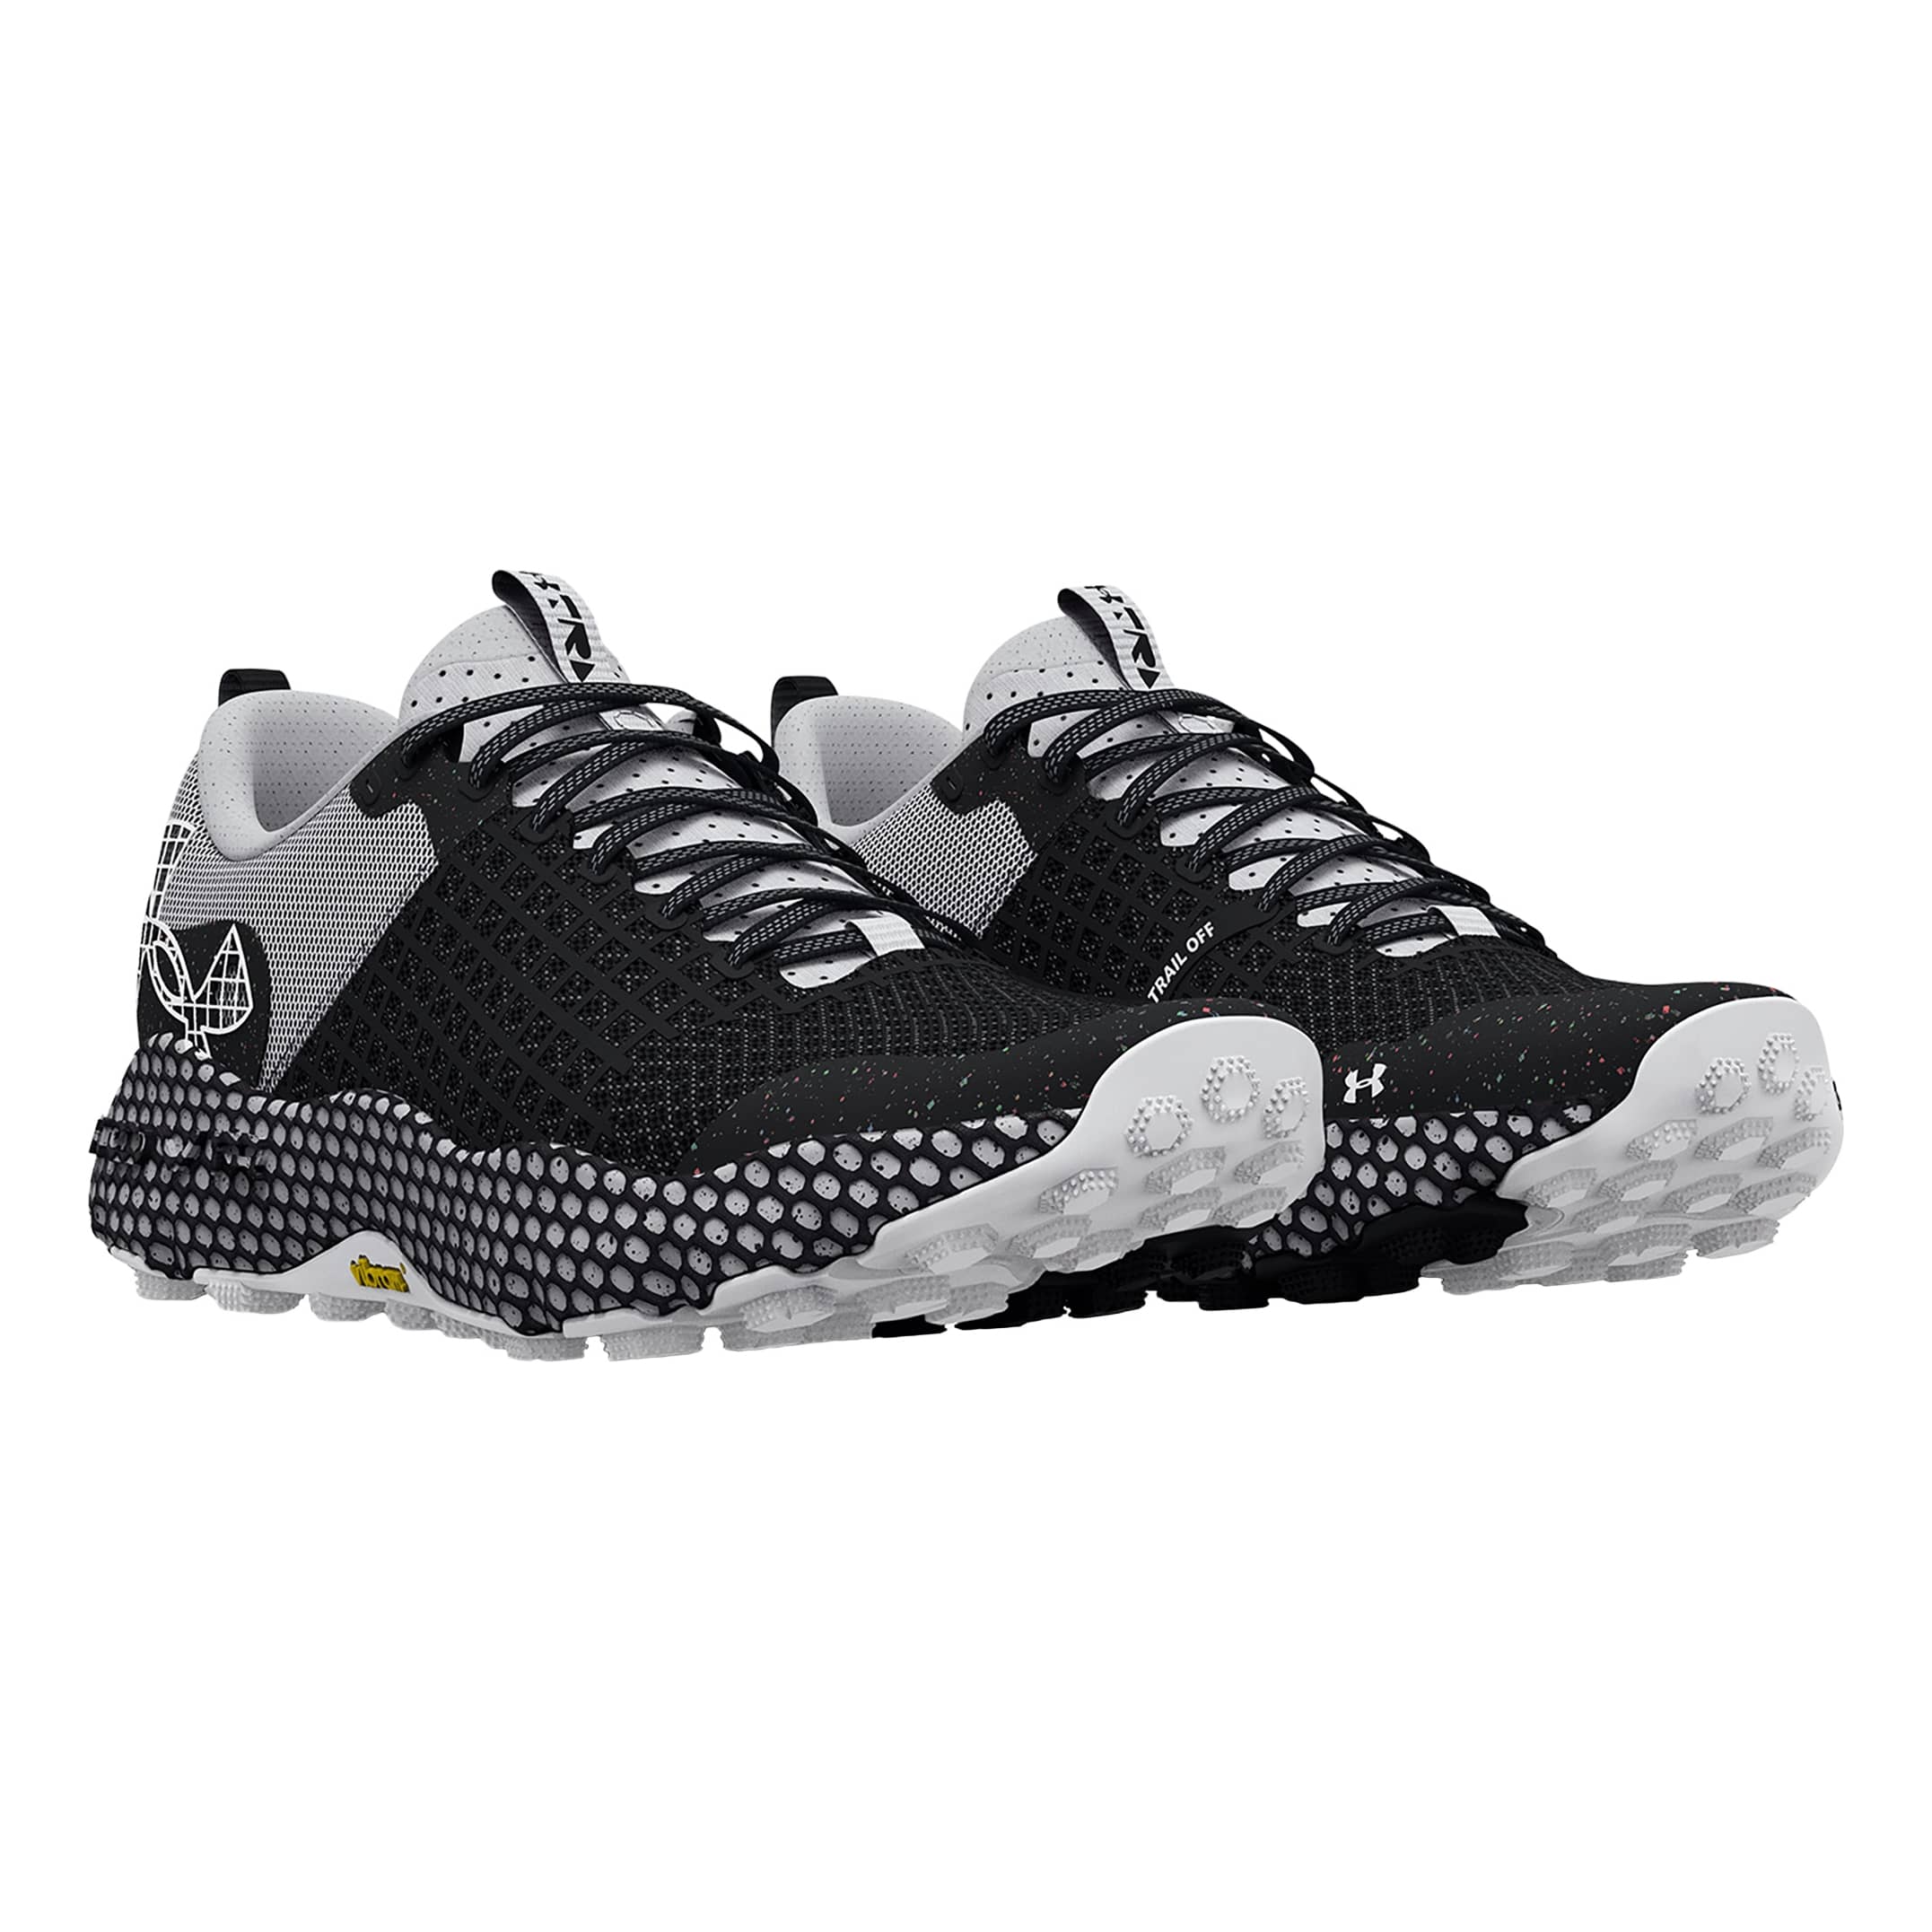 Under Armour® Unisex UA HOVR™ Trail Running Shoes - pair